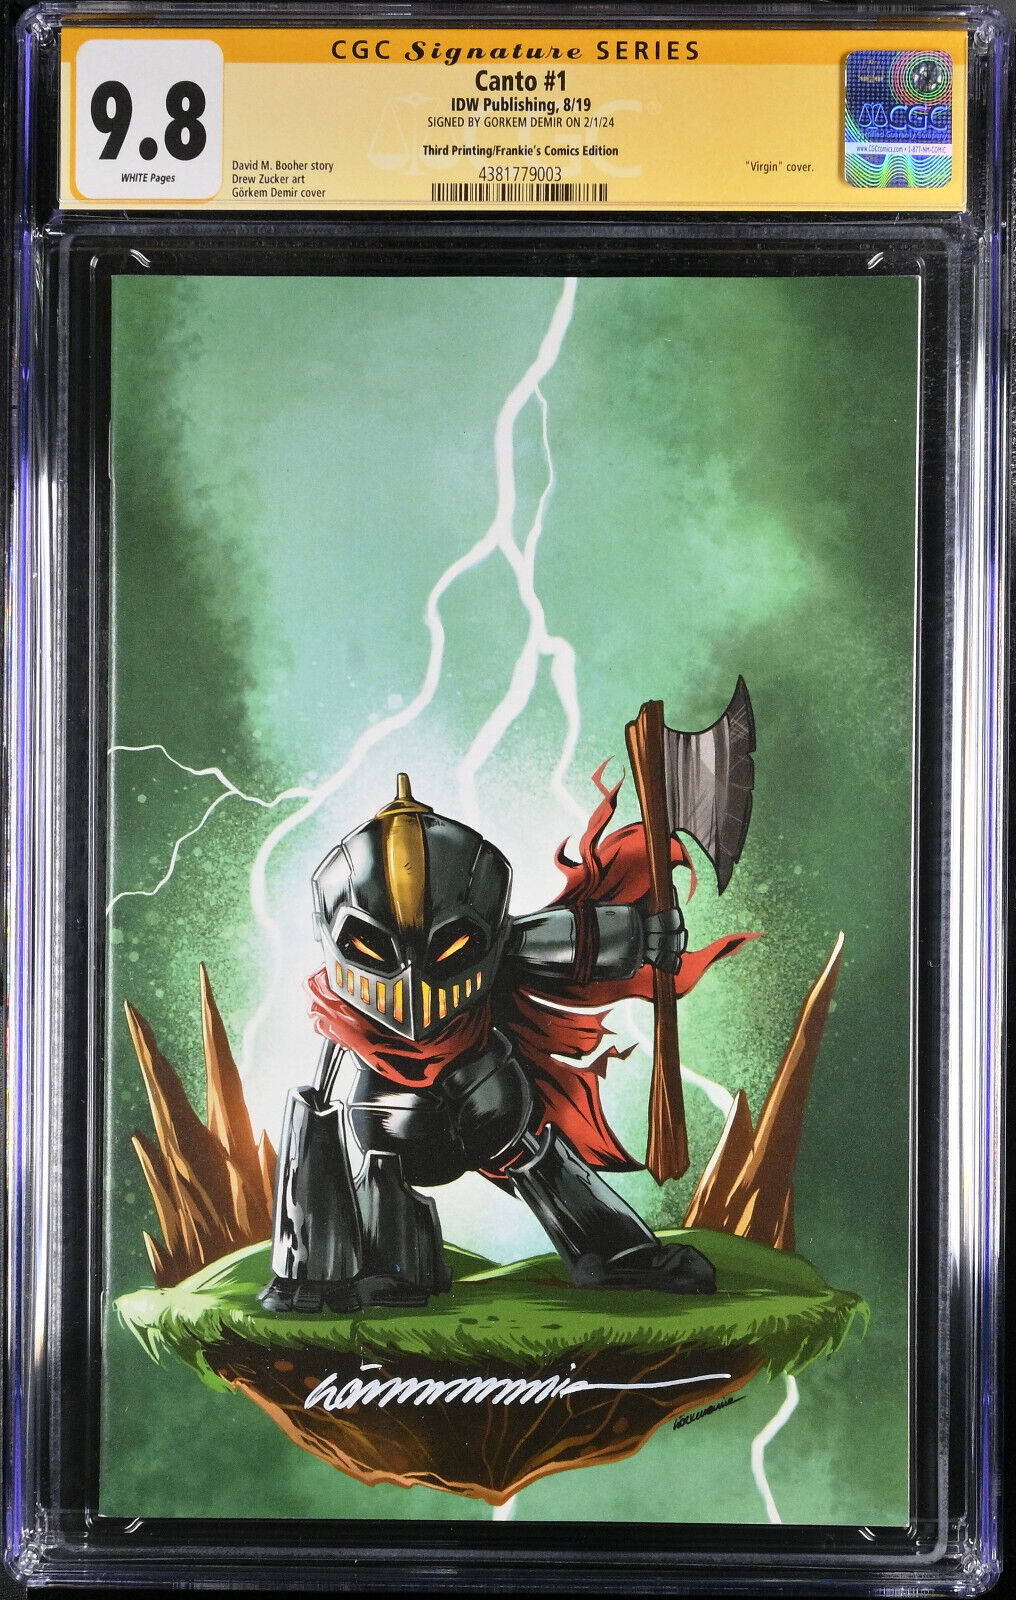 RARE CGC SS 9.8 Canto #1 Gorkem Demir 3rd Print Virgin Exclusive Limited to 300